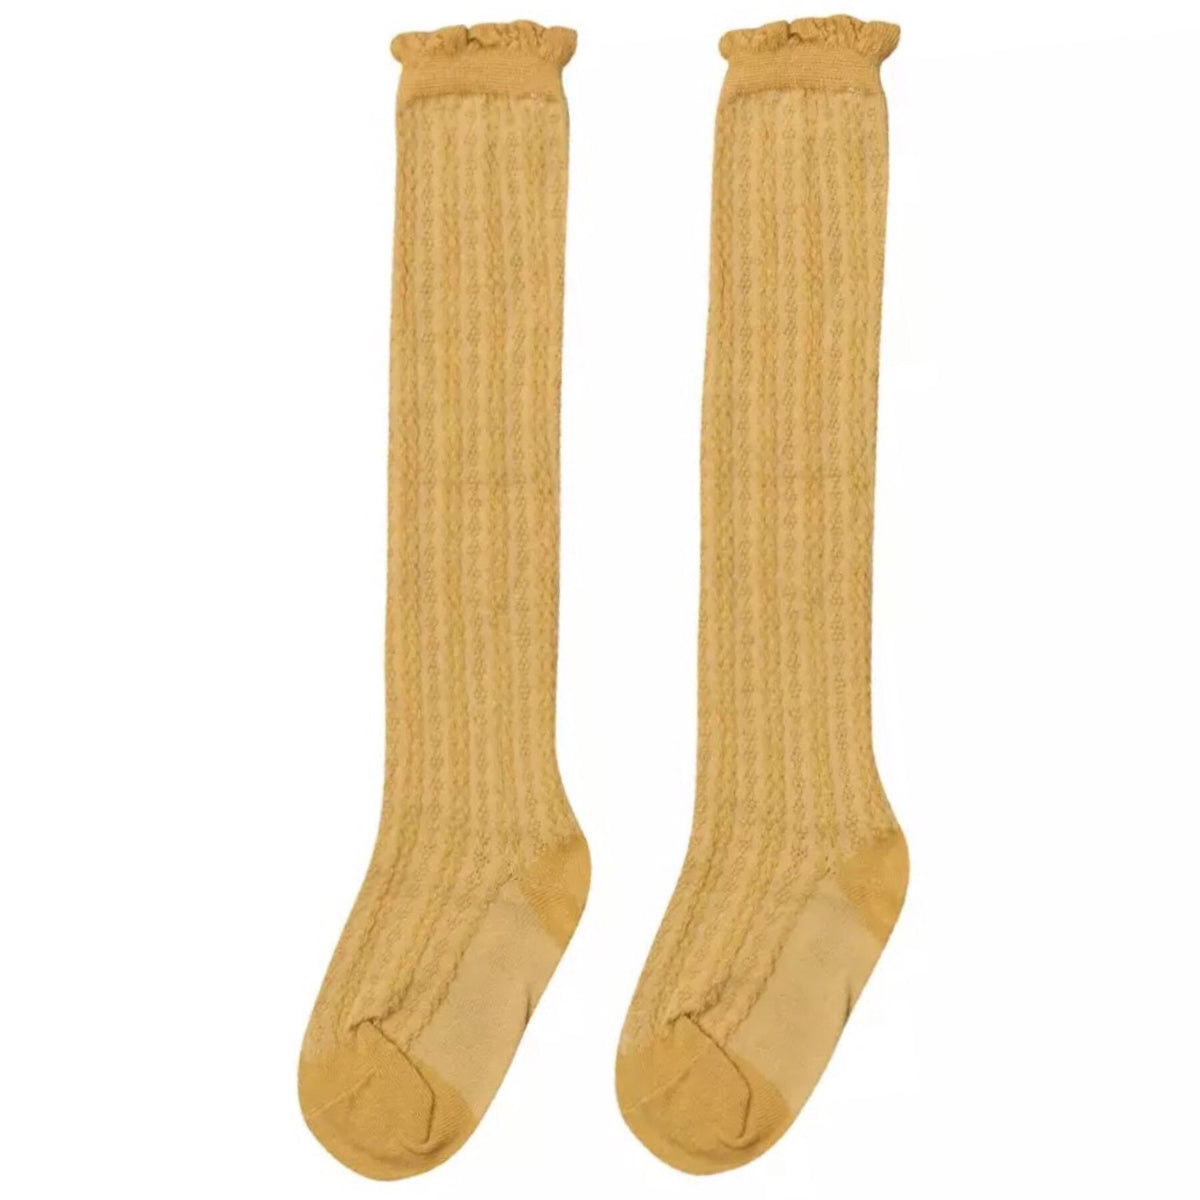 Ribbed Ankle High Socks - Yellow